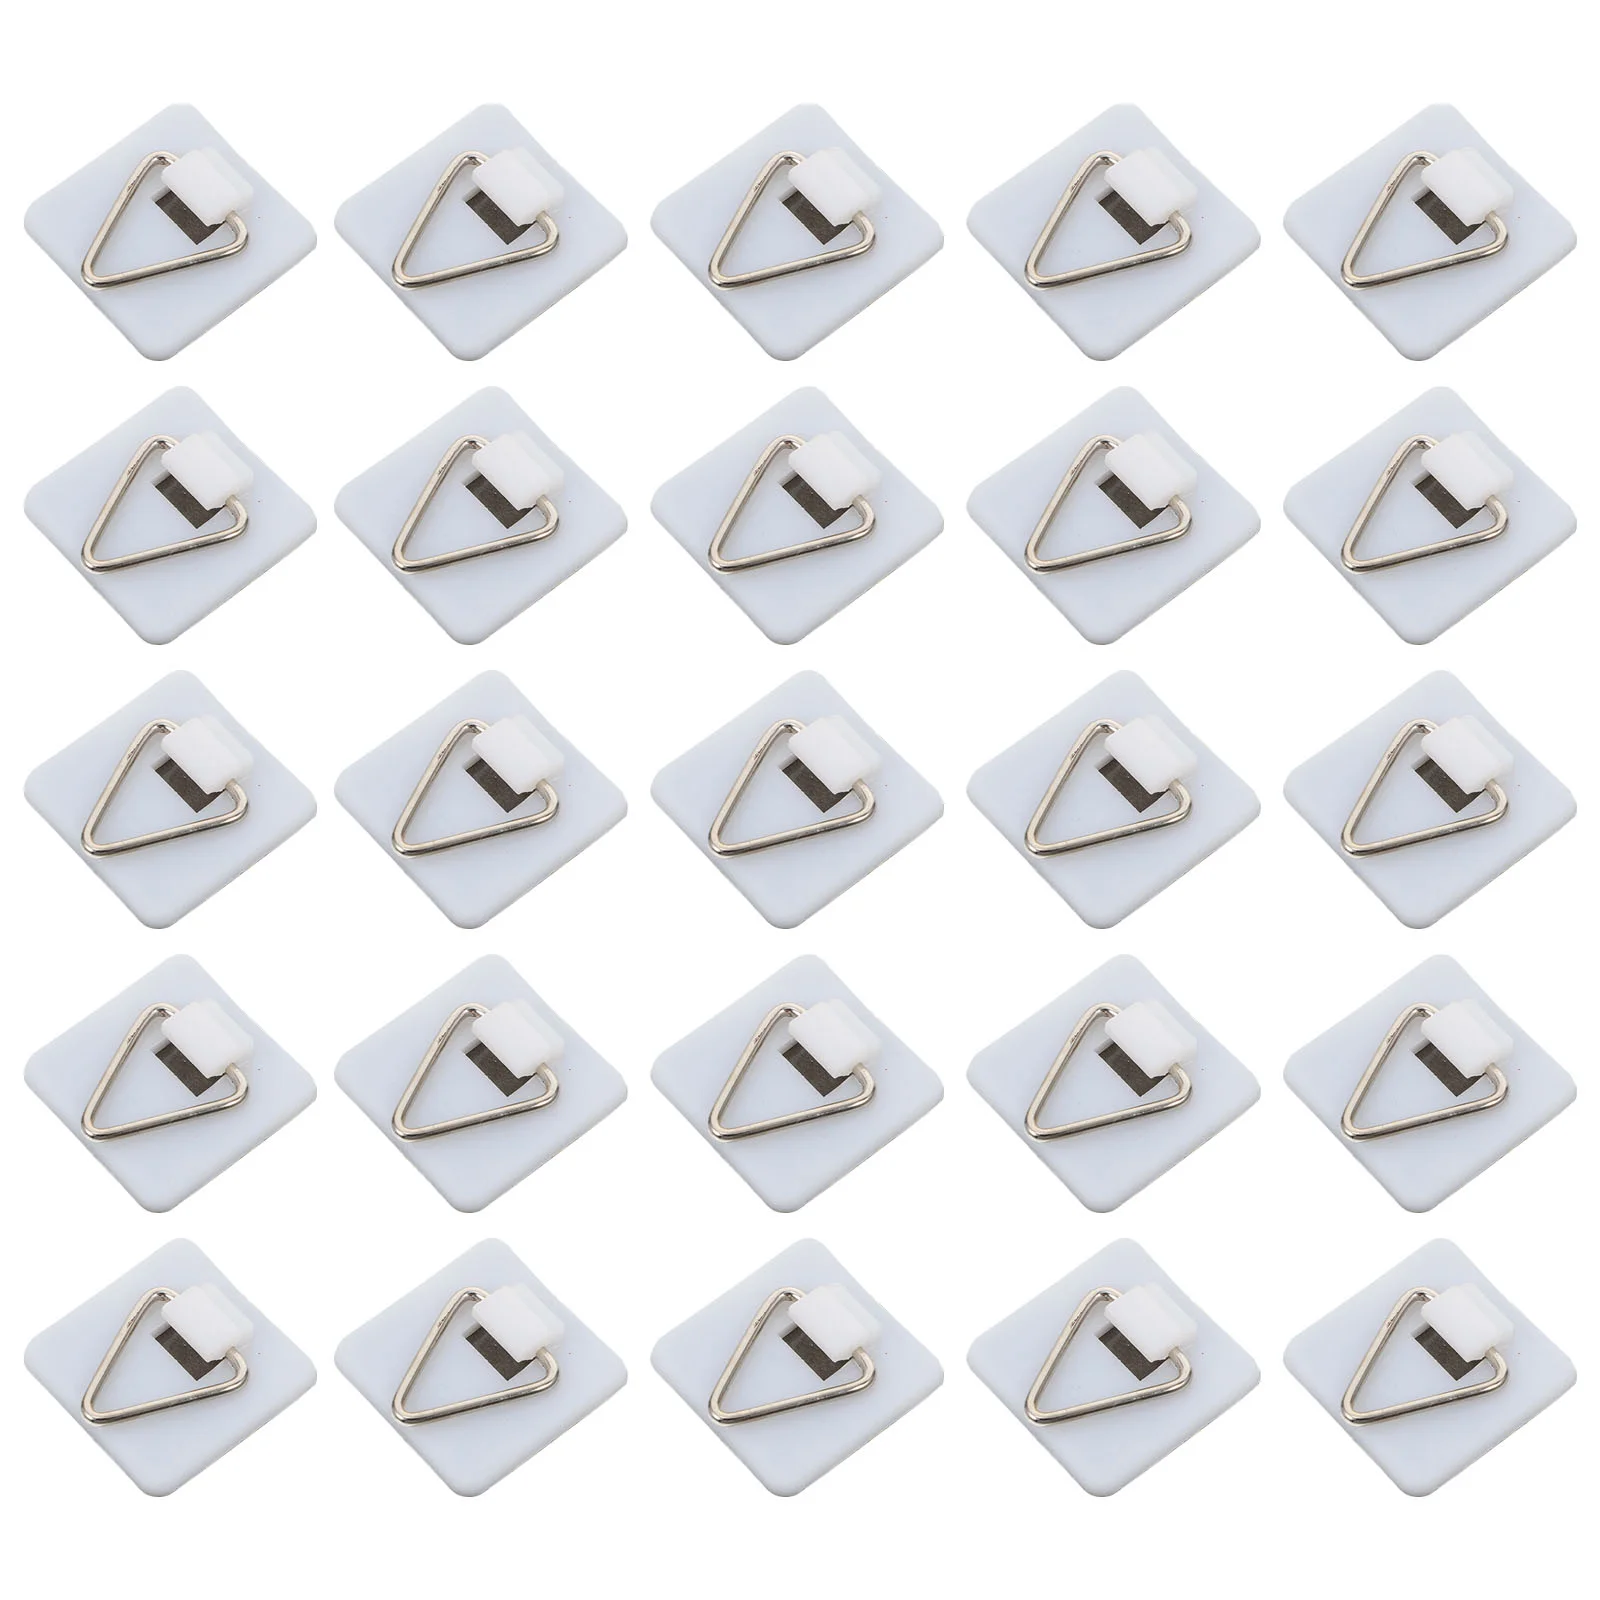 

50 Pcs Nail-free Triangular Sticky Hook Painting Hooks Home Wall-mounted Board Picture Hangers Iron No